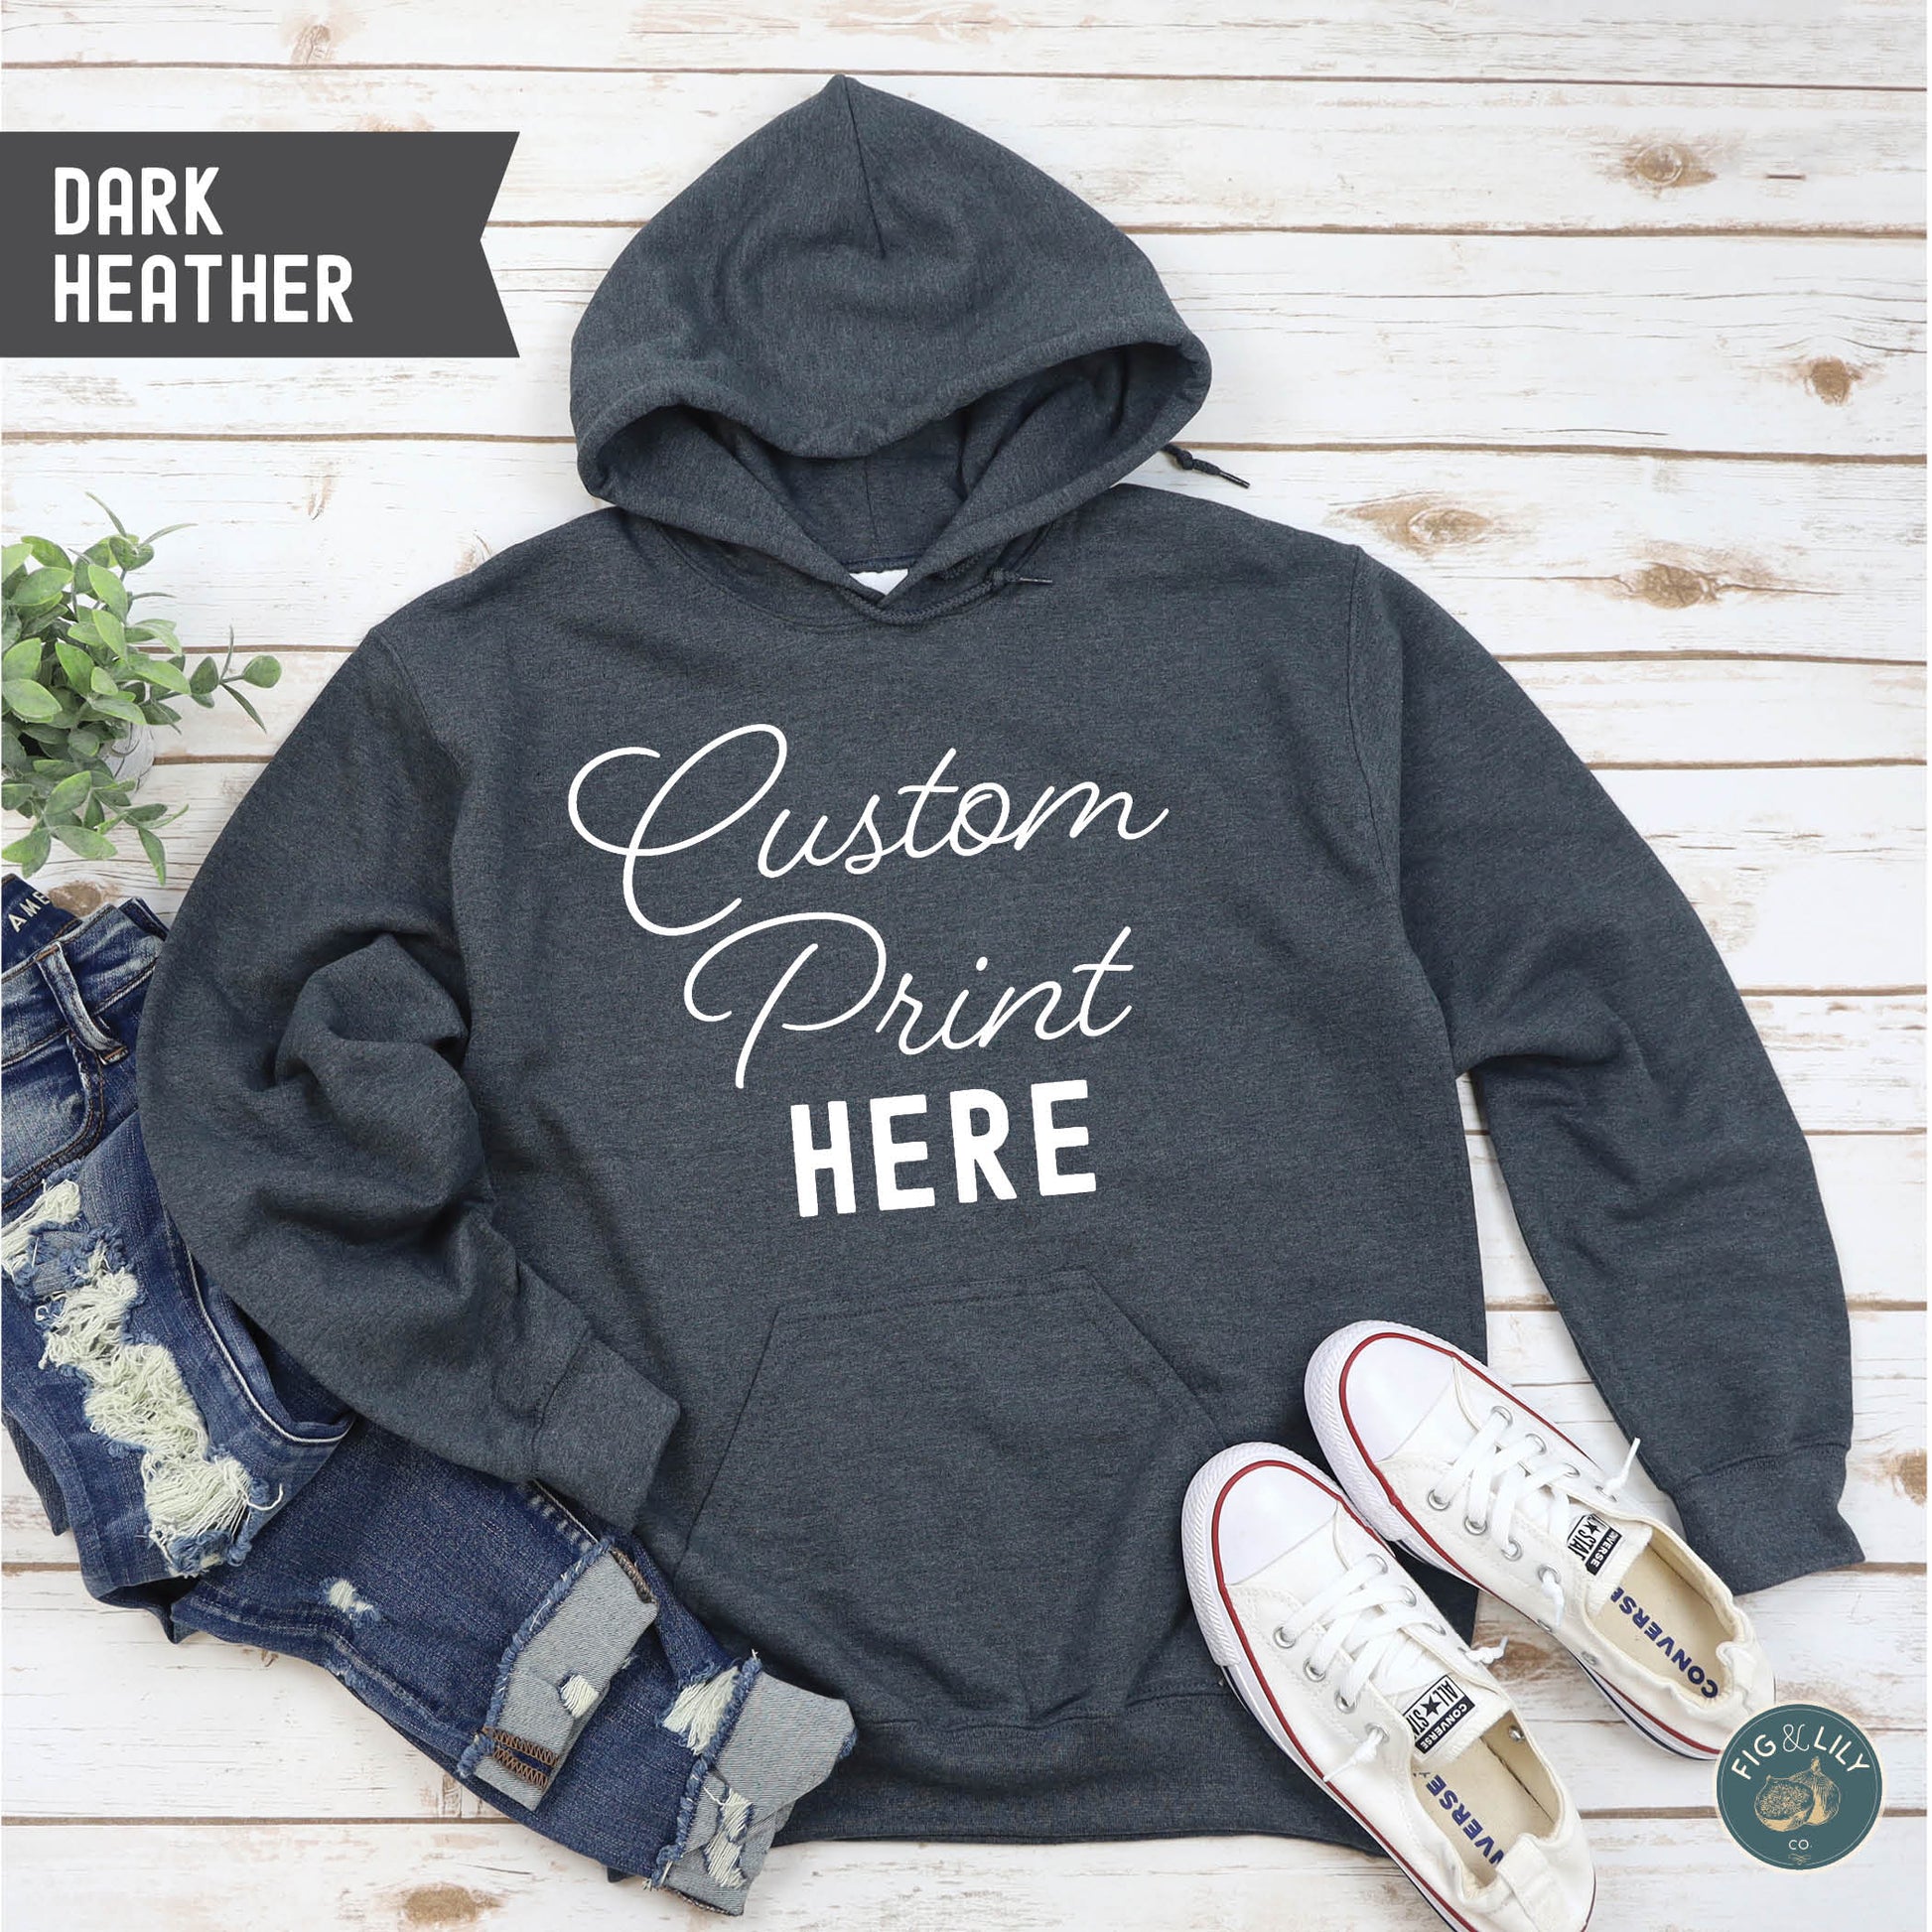 Heather Dark Gray Unisex Hoodie, Custom Print Design, Your Design Here, Personalized Design created just for you, digital proof approval included